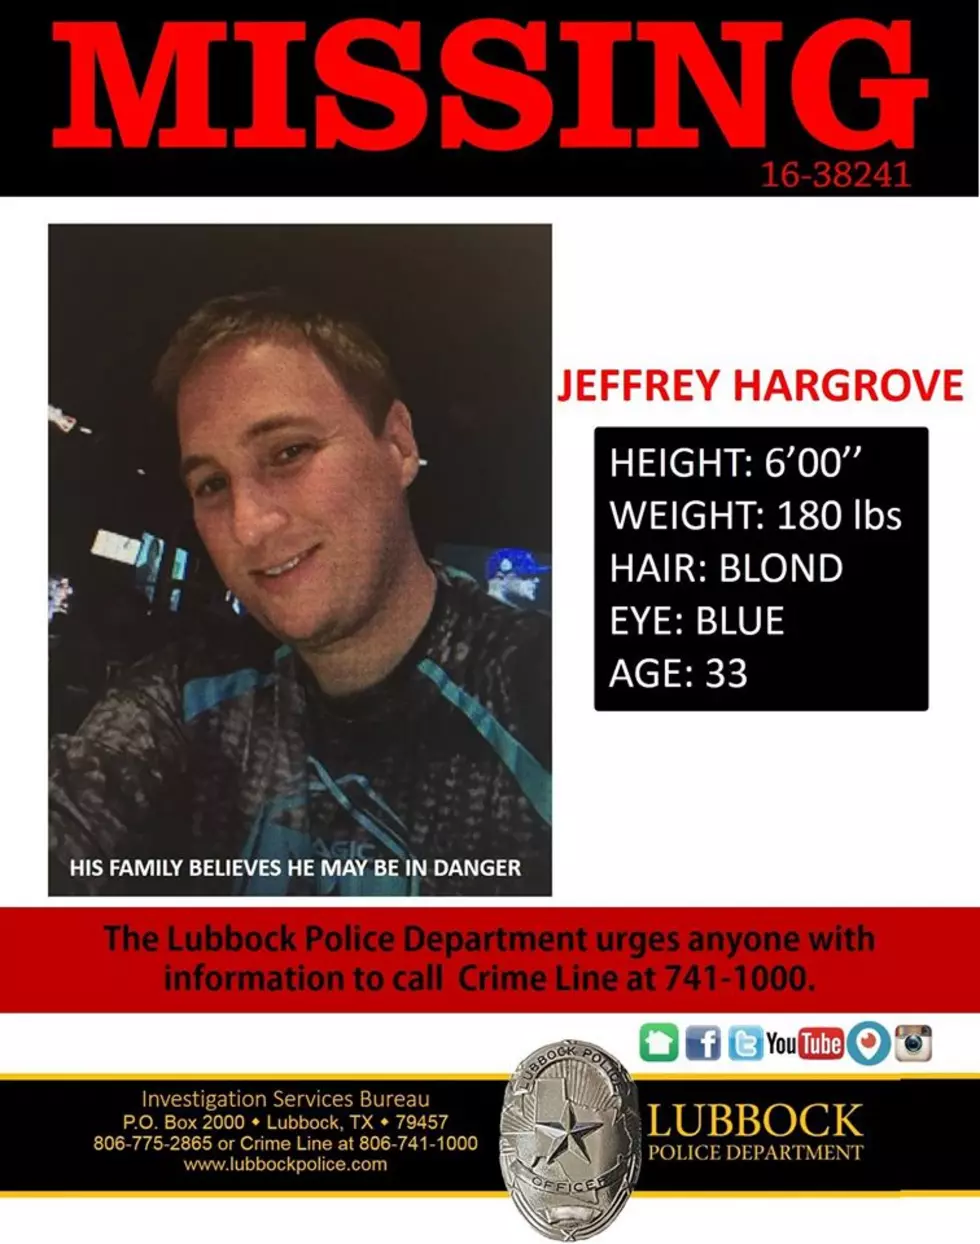 Family & Friends Help Search for Missing Texas Tech Student Jeffrey Hargrove